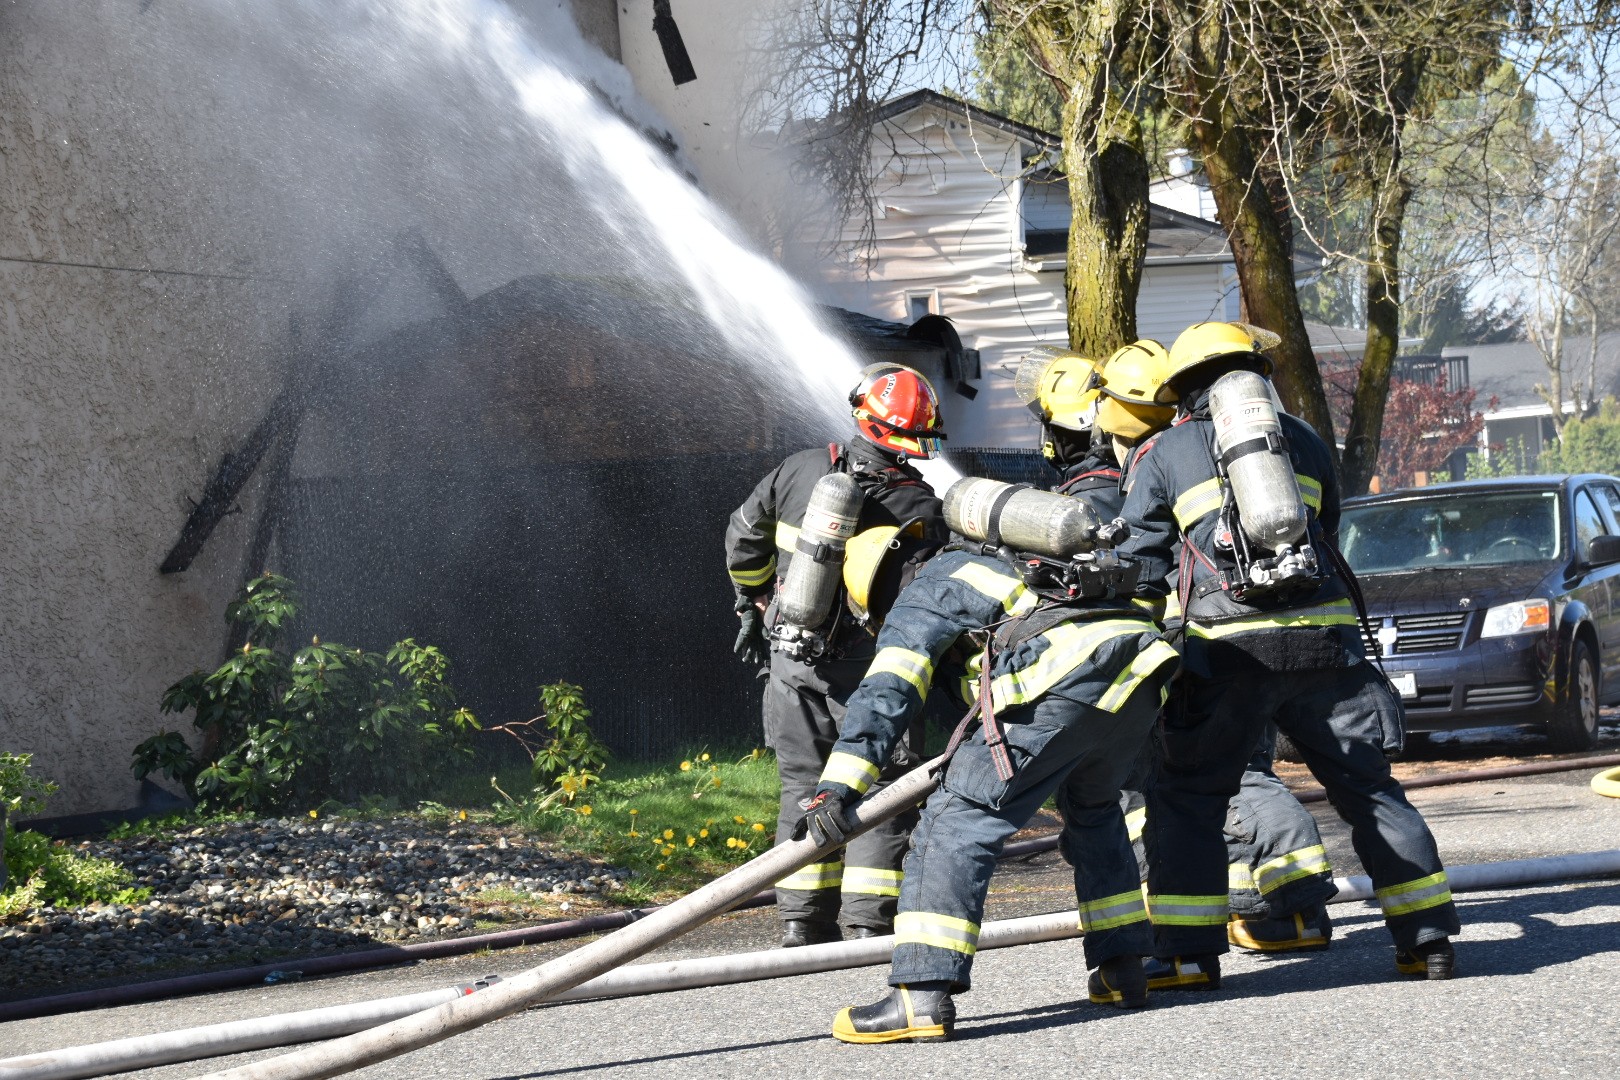 3 in hospital after multi&house fire in Aldergrove